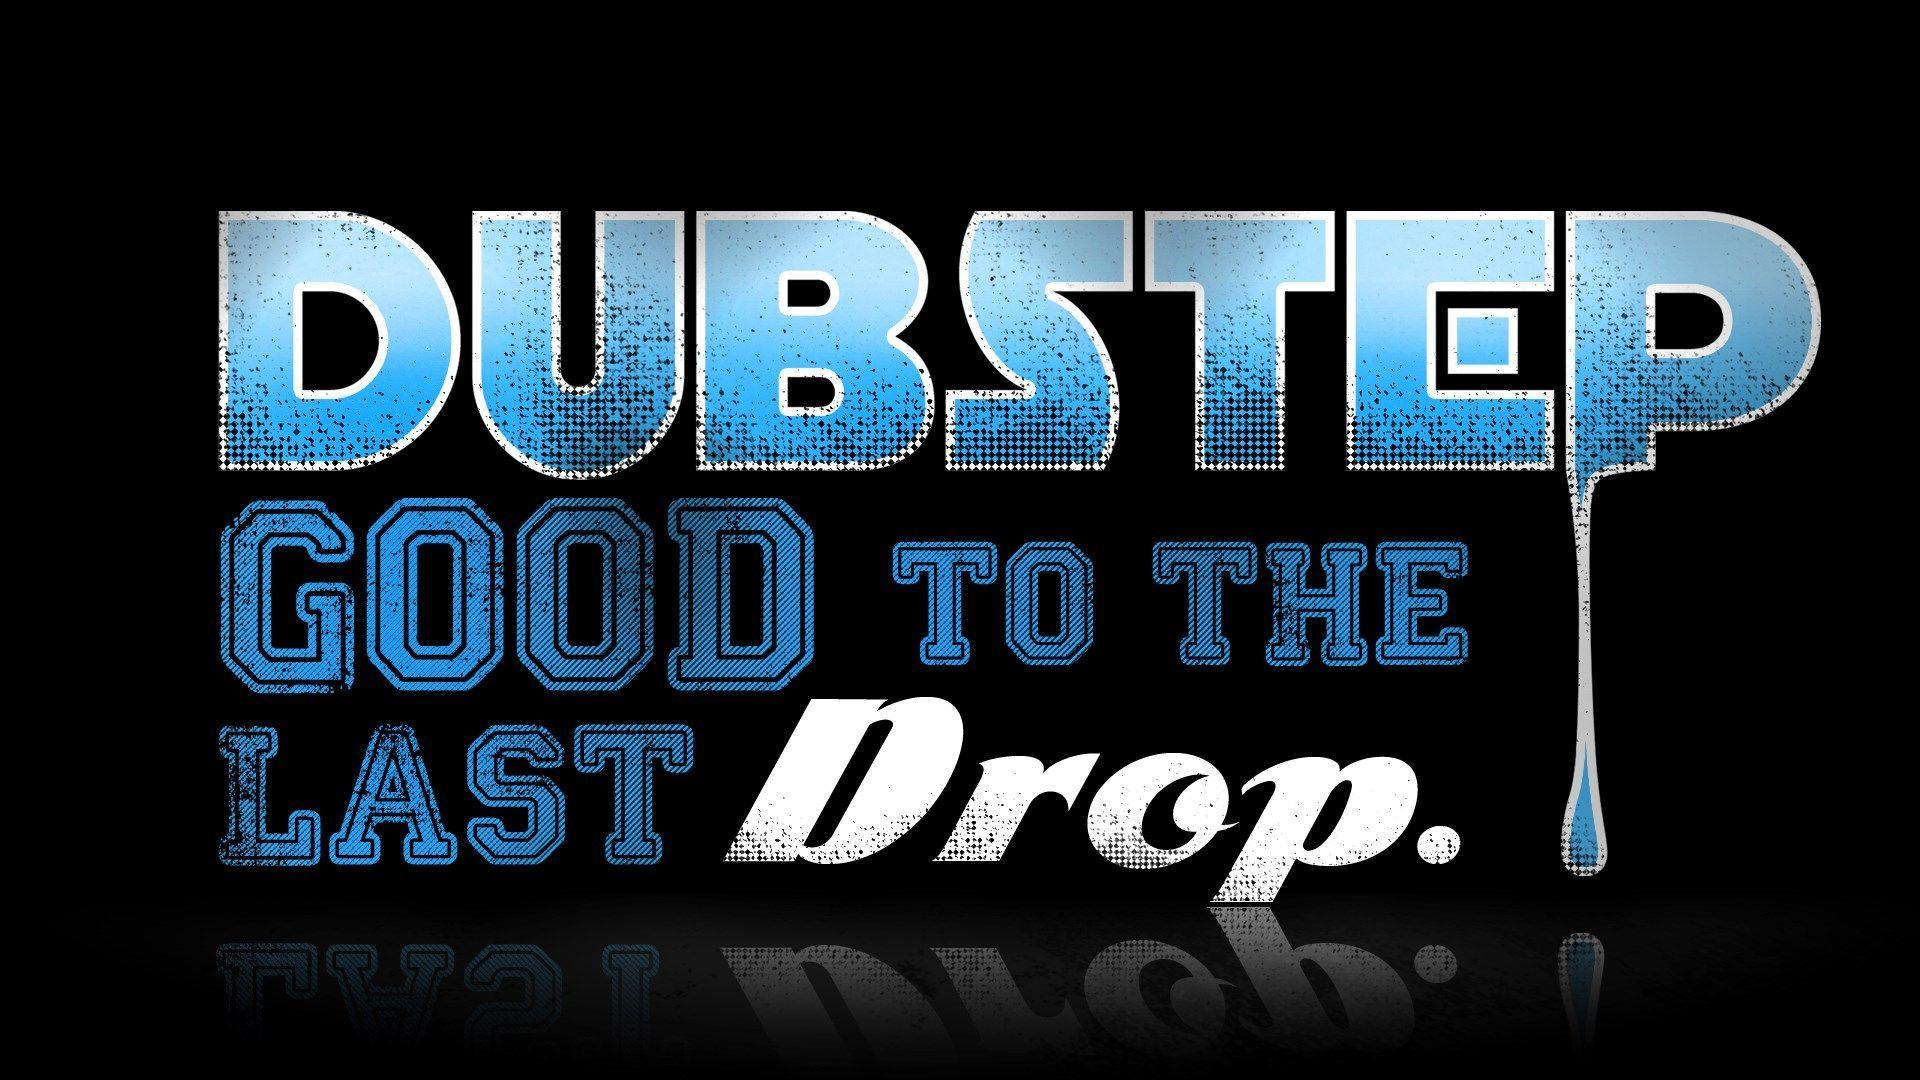 HD Widescreen dubstep picture, 1920x1080 378 kB